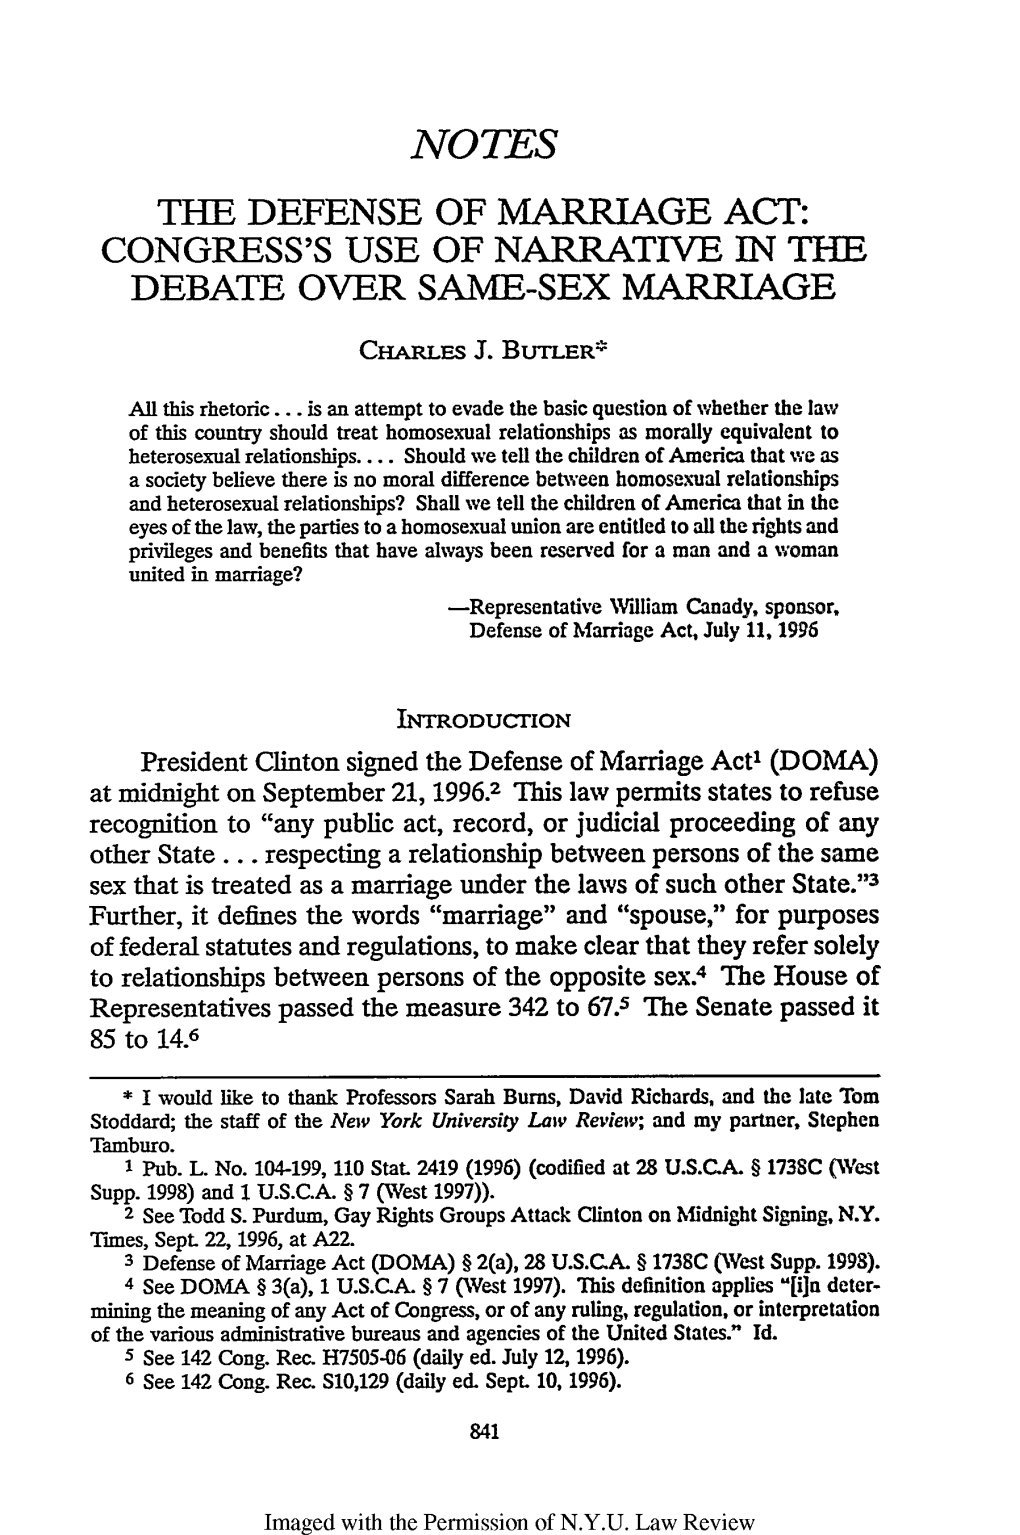 Defense of Marriage Act: Congress's Use of Narrative in the Debate Over Same-Sex Marriage